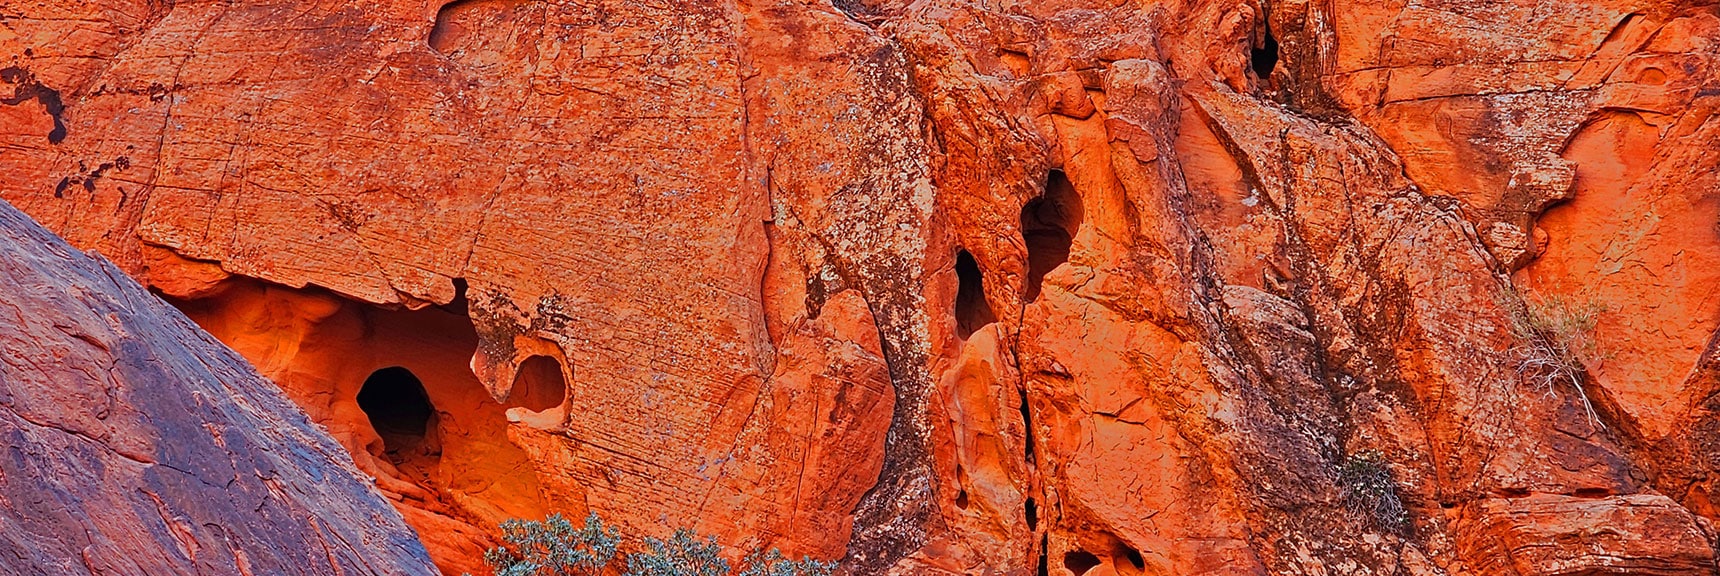 Endless Variations of Rock Art on Cliff Walls | Lower Calico Hills Loop | Calico Basin & Red Rock Canyon, Nevada